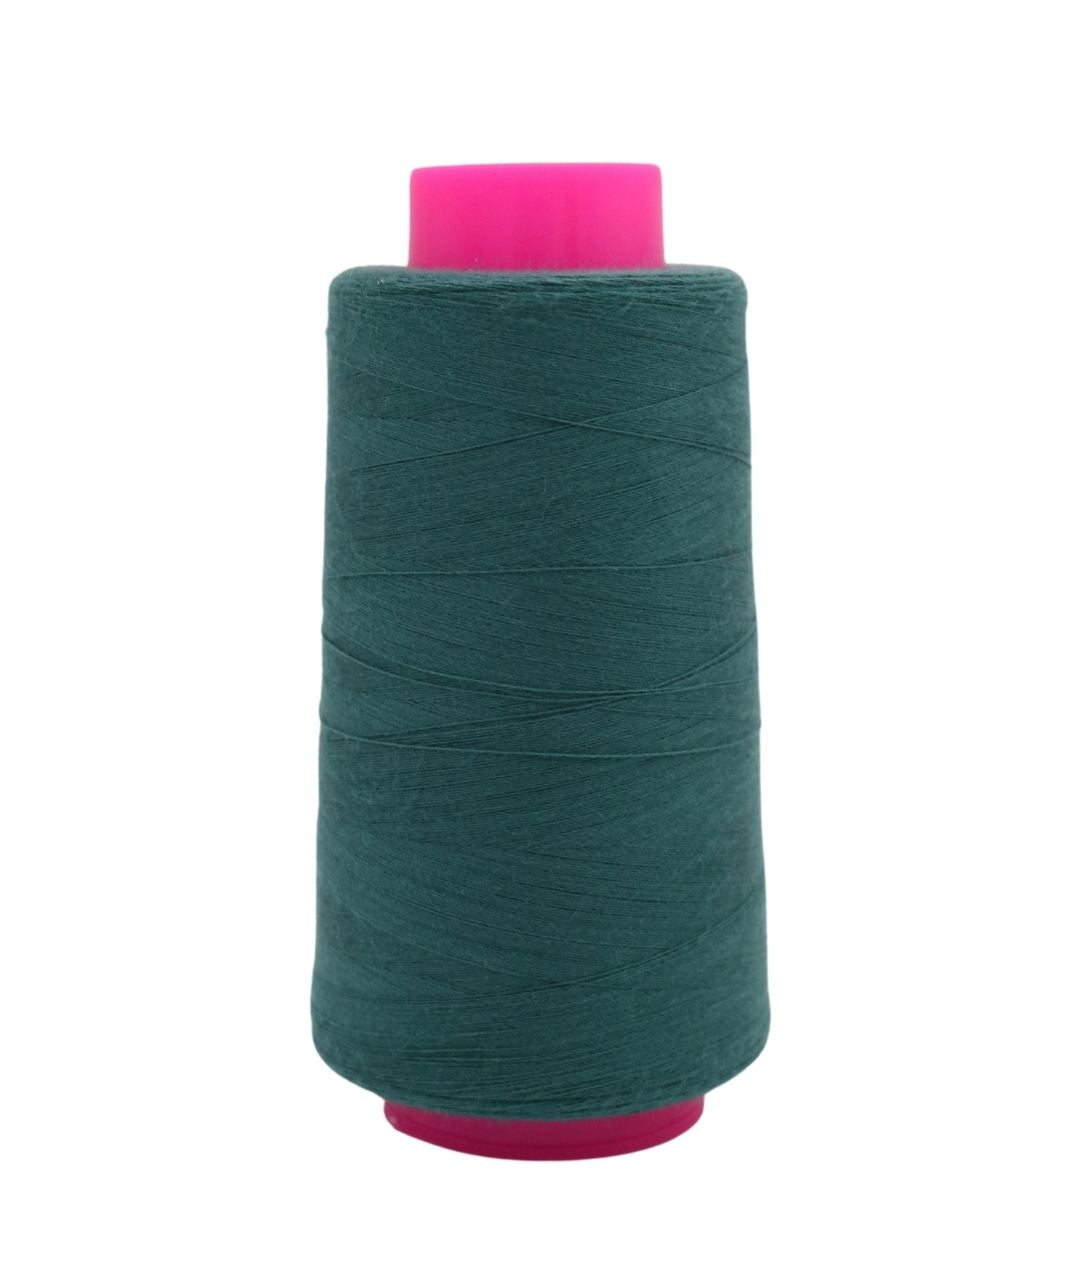 100% Recycled PET Thread Spools - various colours